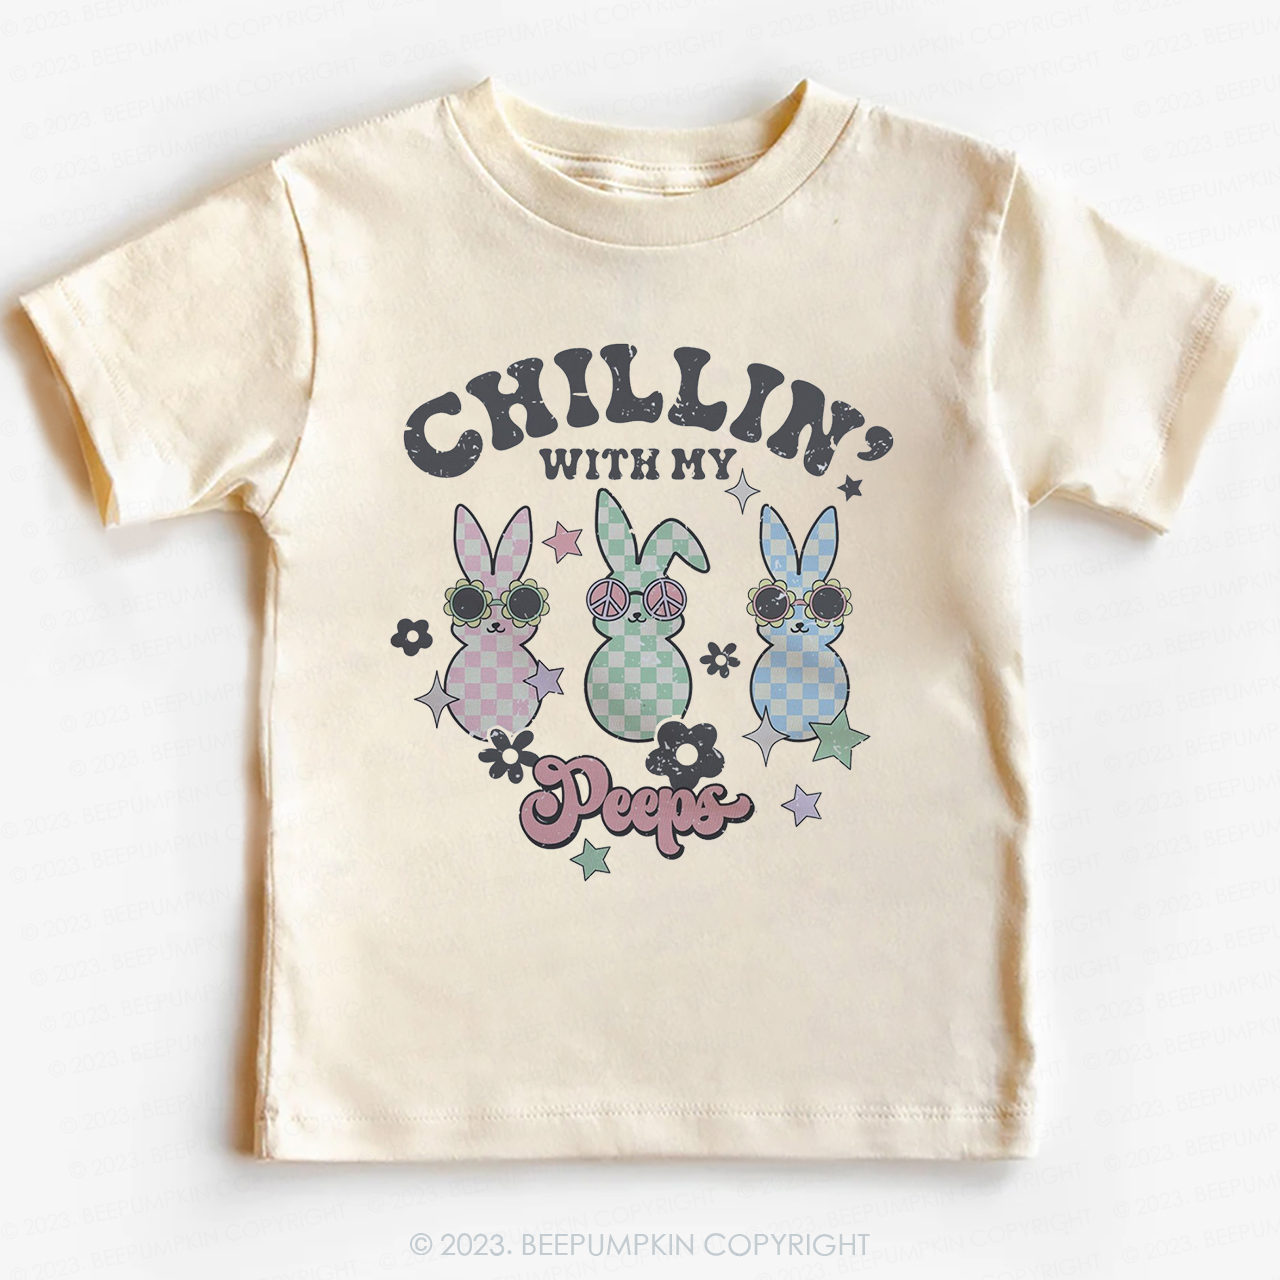  Chillin' with My Peeps -Toddler Tees